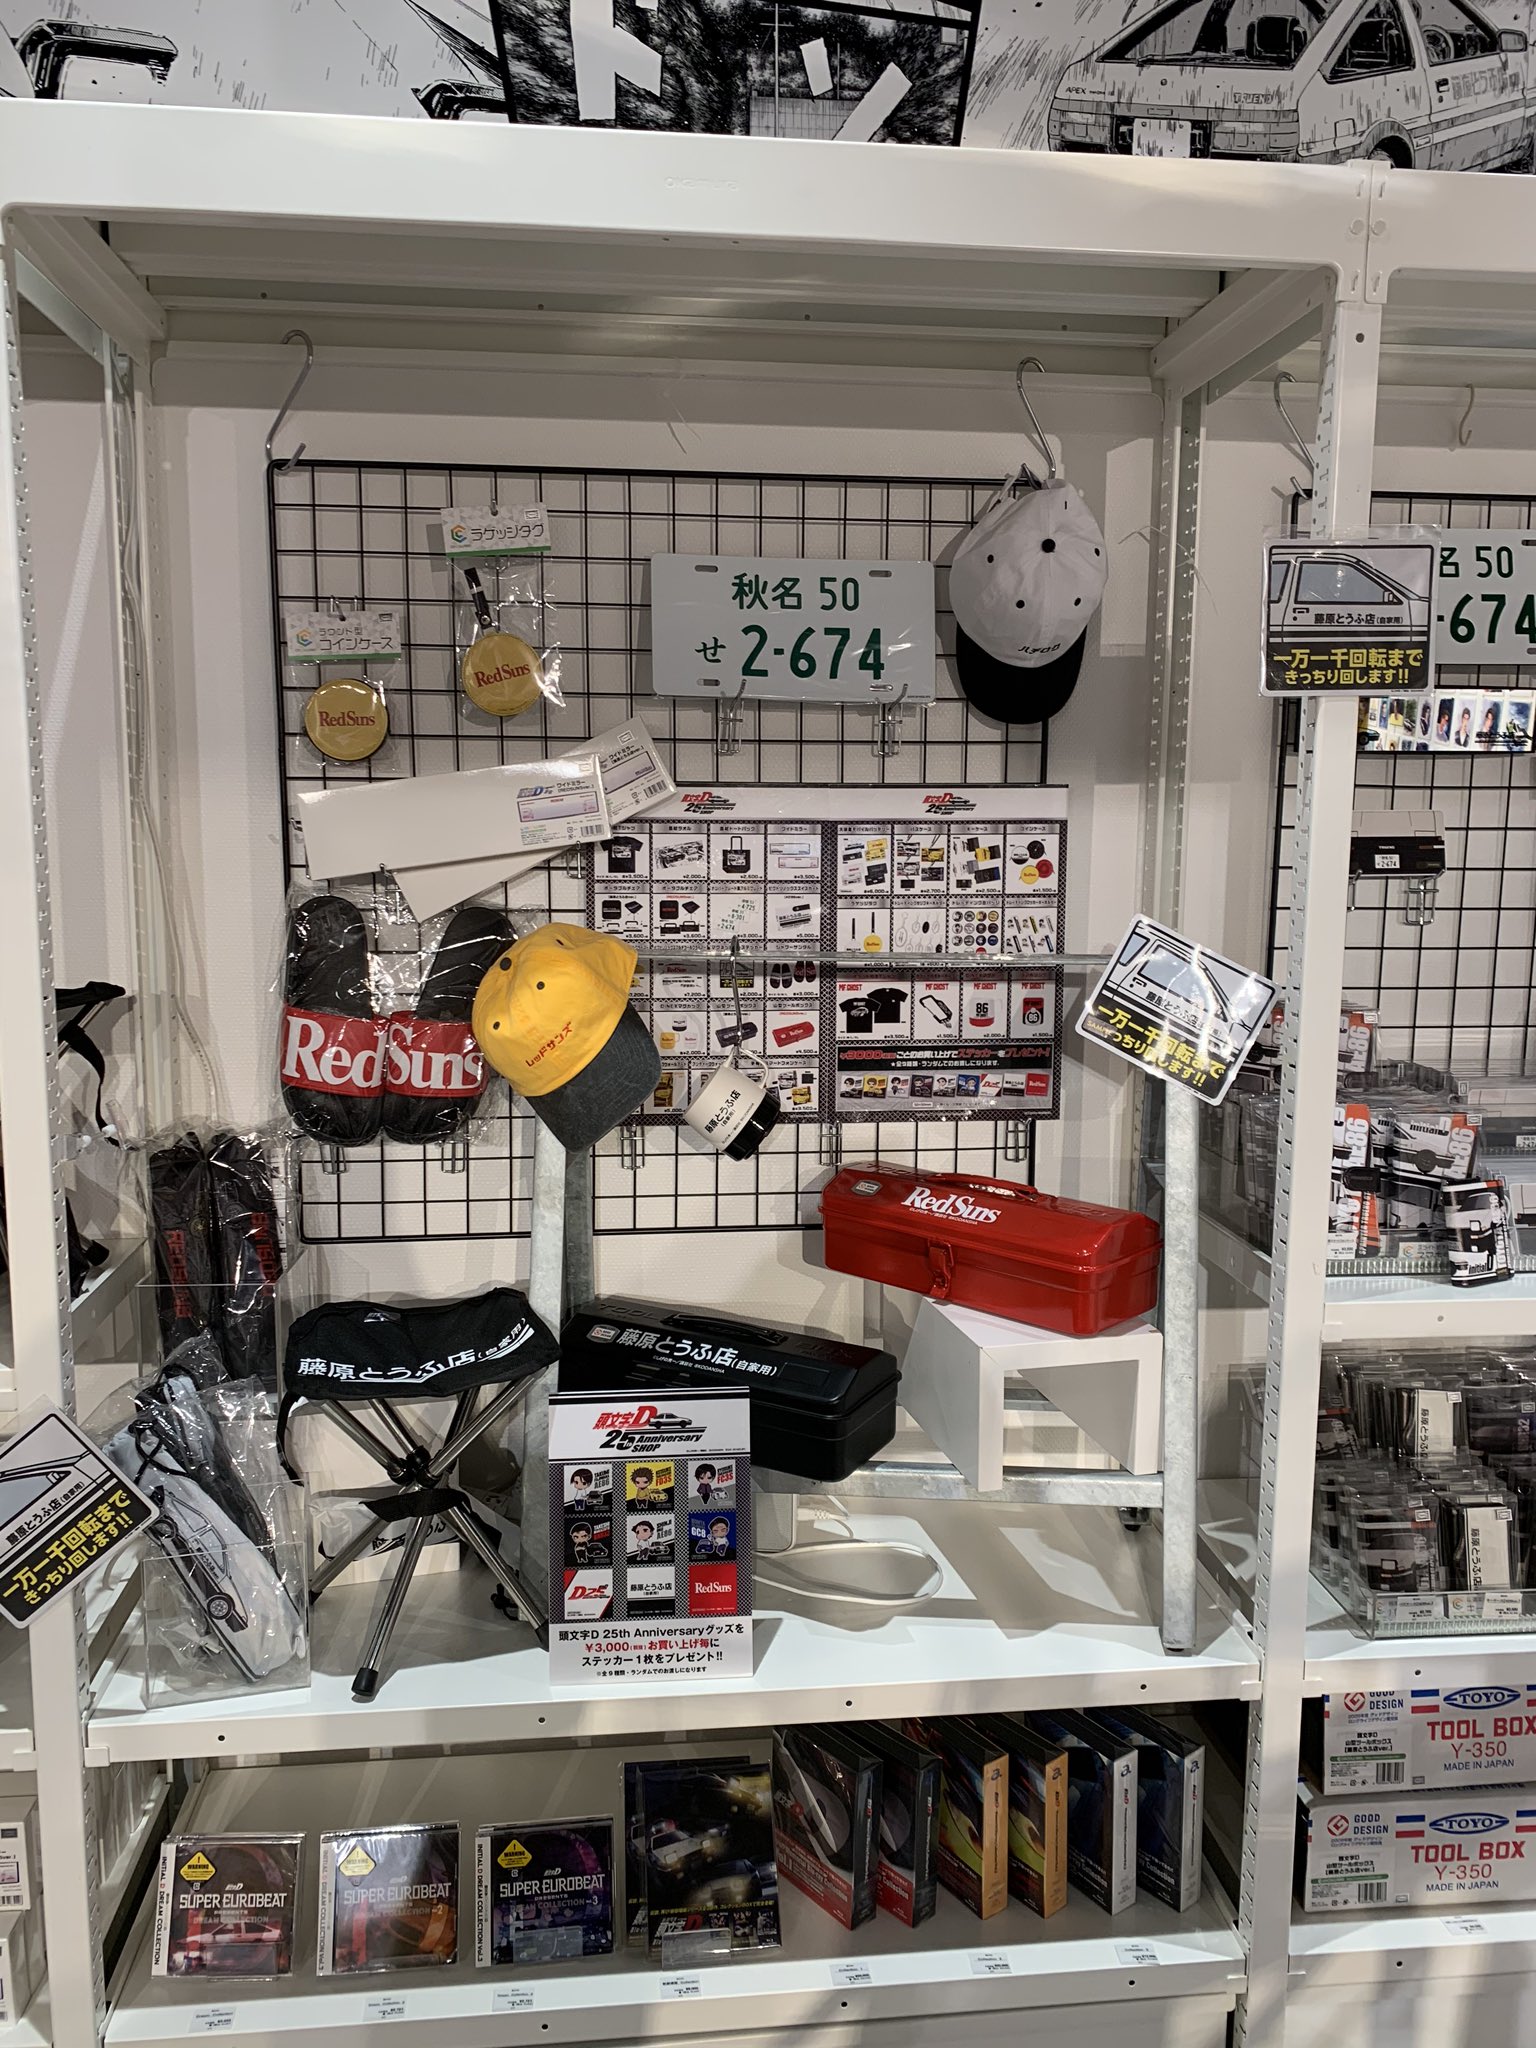 Official Initial D Merchandise for Anime and Racing Fans